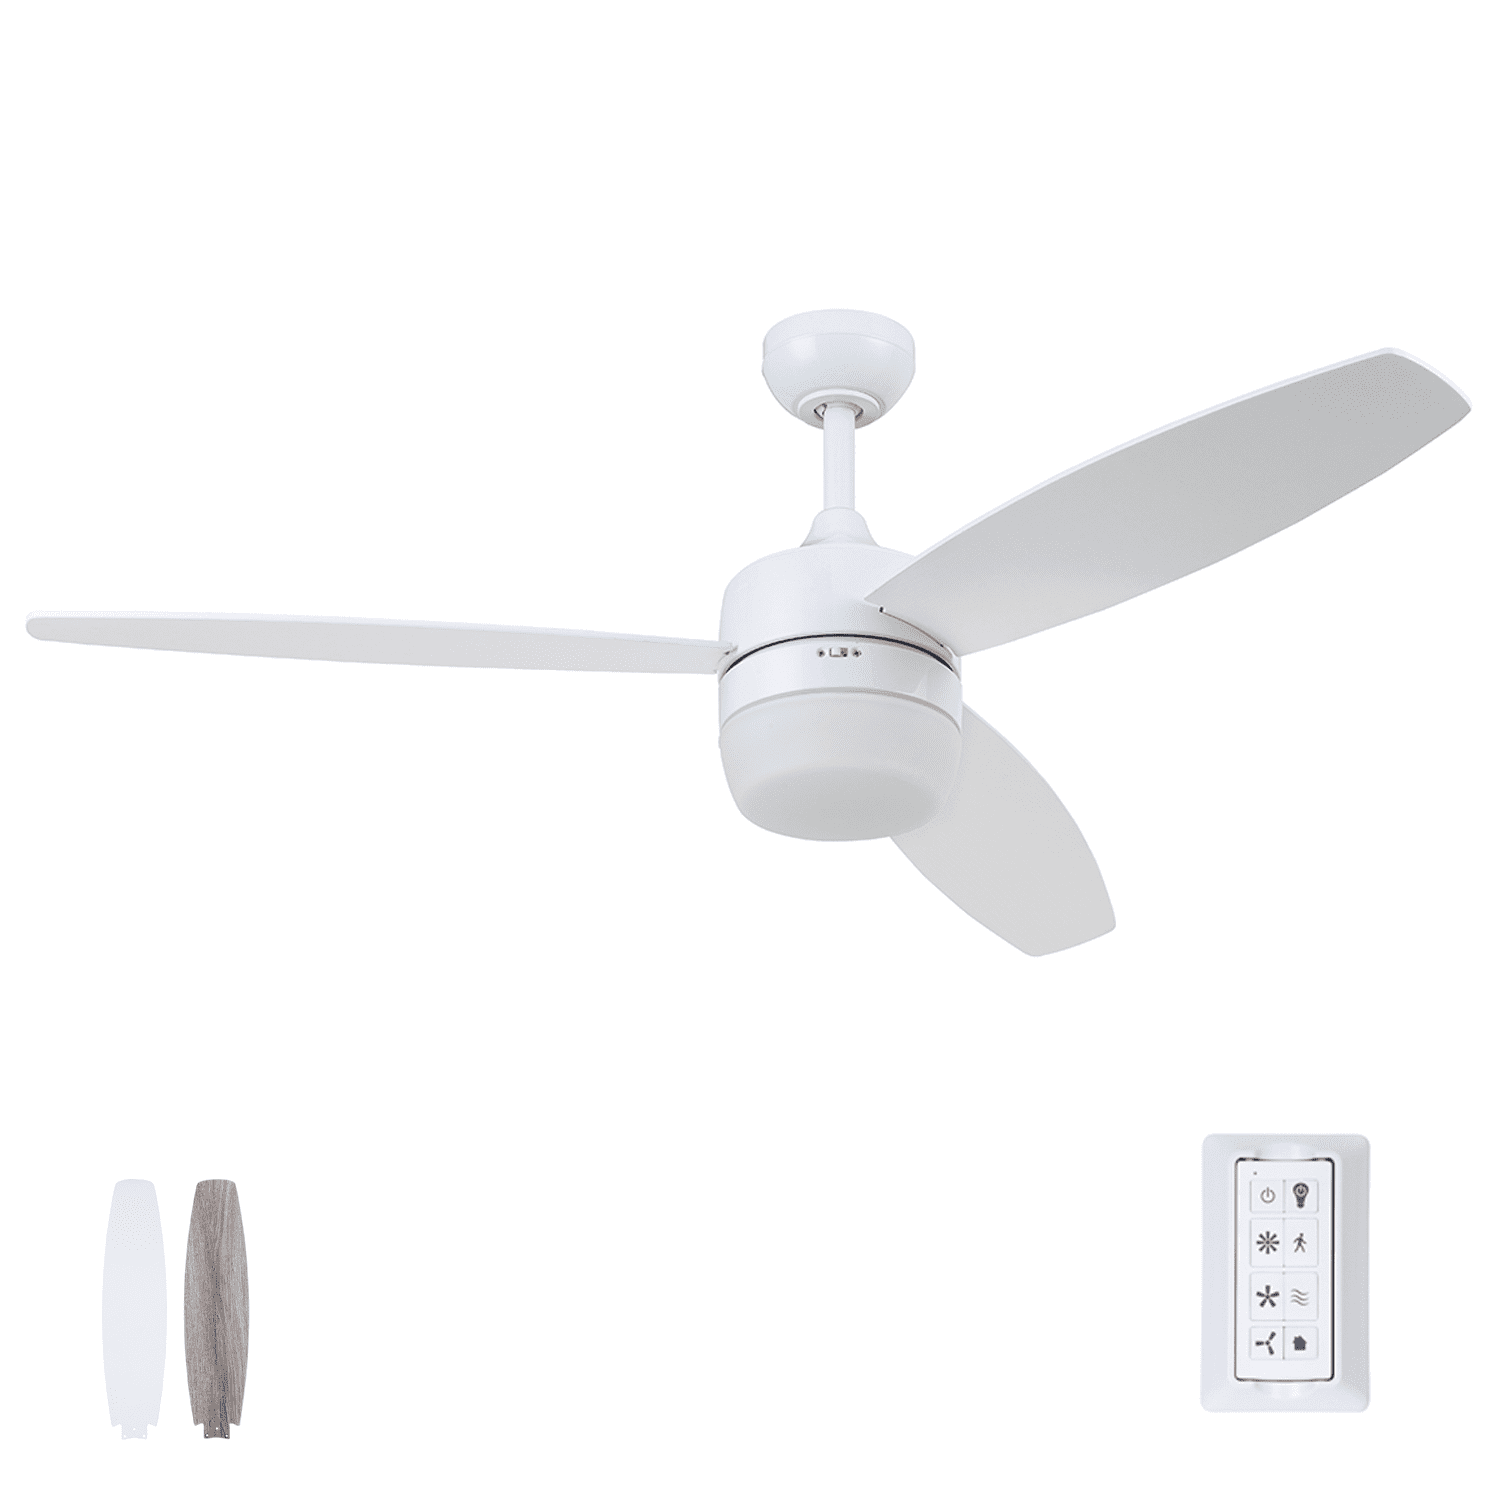 Balloo ceiling fan nickel 122 cm with lighting and remote control 